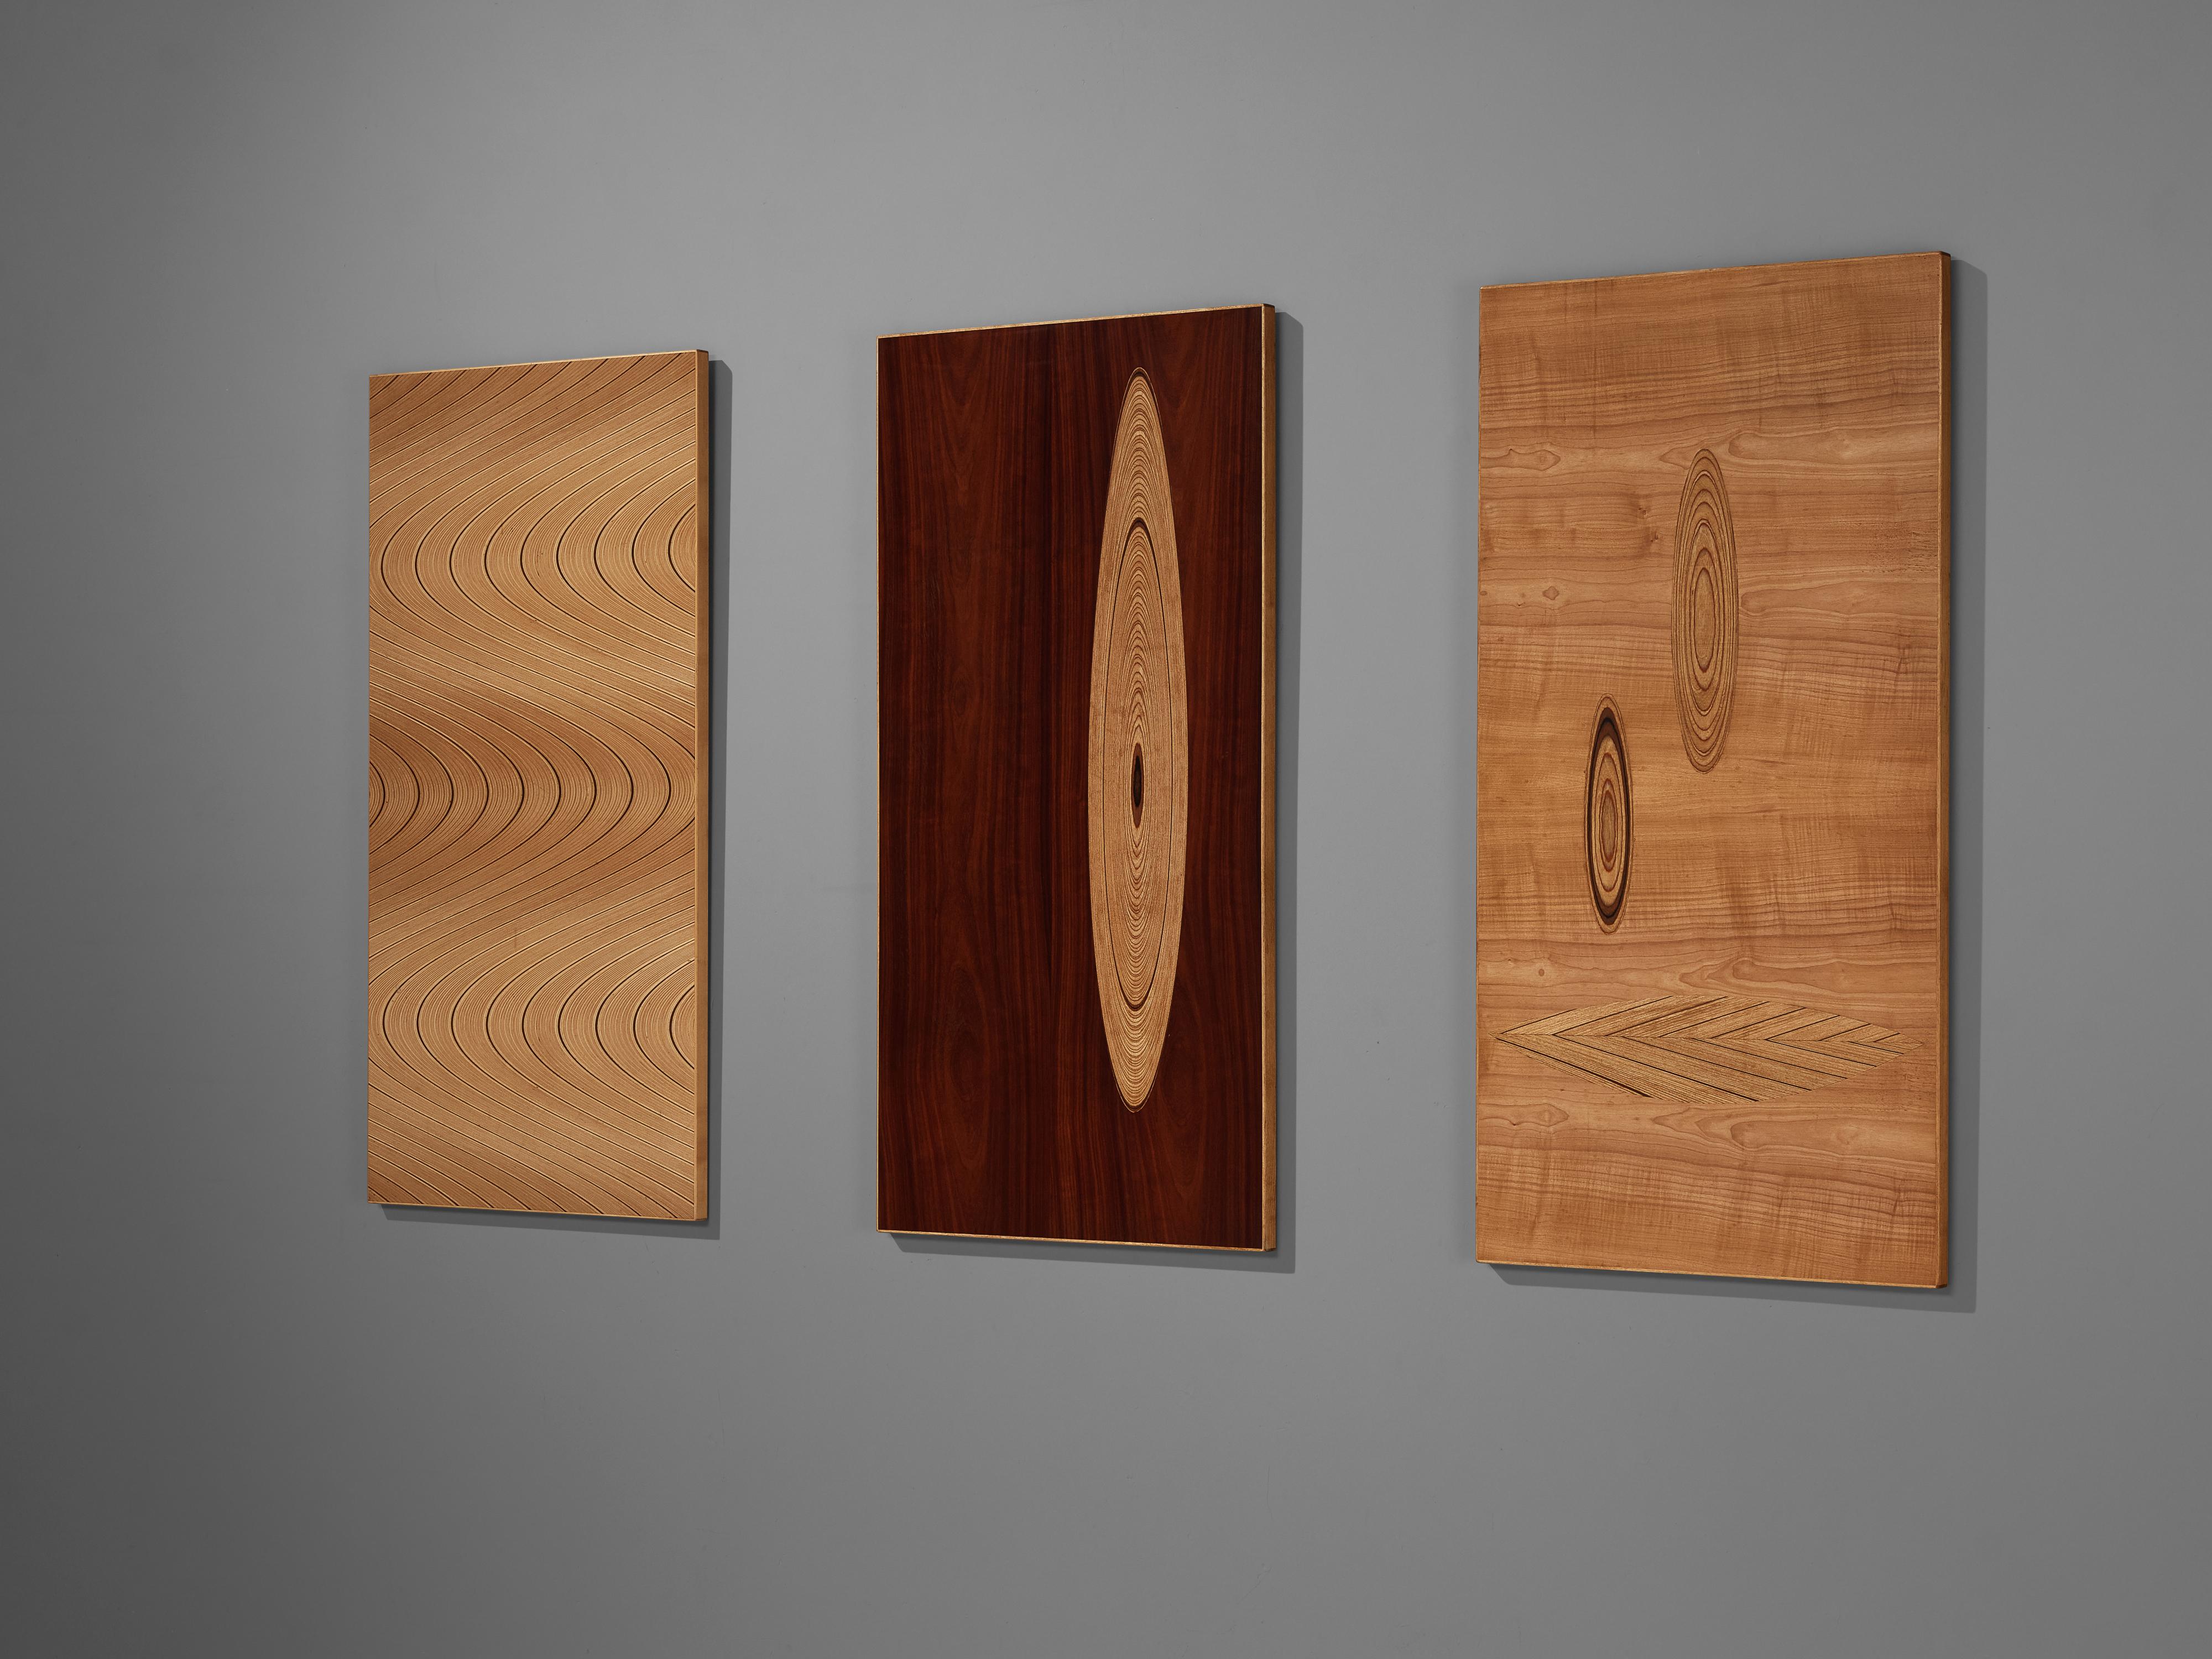 Tapio Wirkkala for Asko, set of three wall panels, birch, plywood, Finland, 1950s

Finnish designer Wirkkala, who is known for his great craftsmanship and knowledge of wood, shows his talent as a sculptor and artist with this item. The three wall